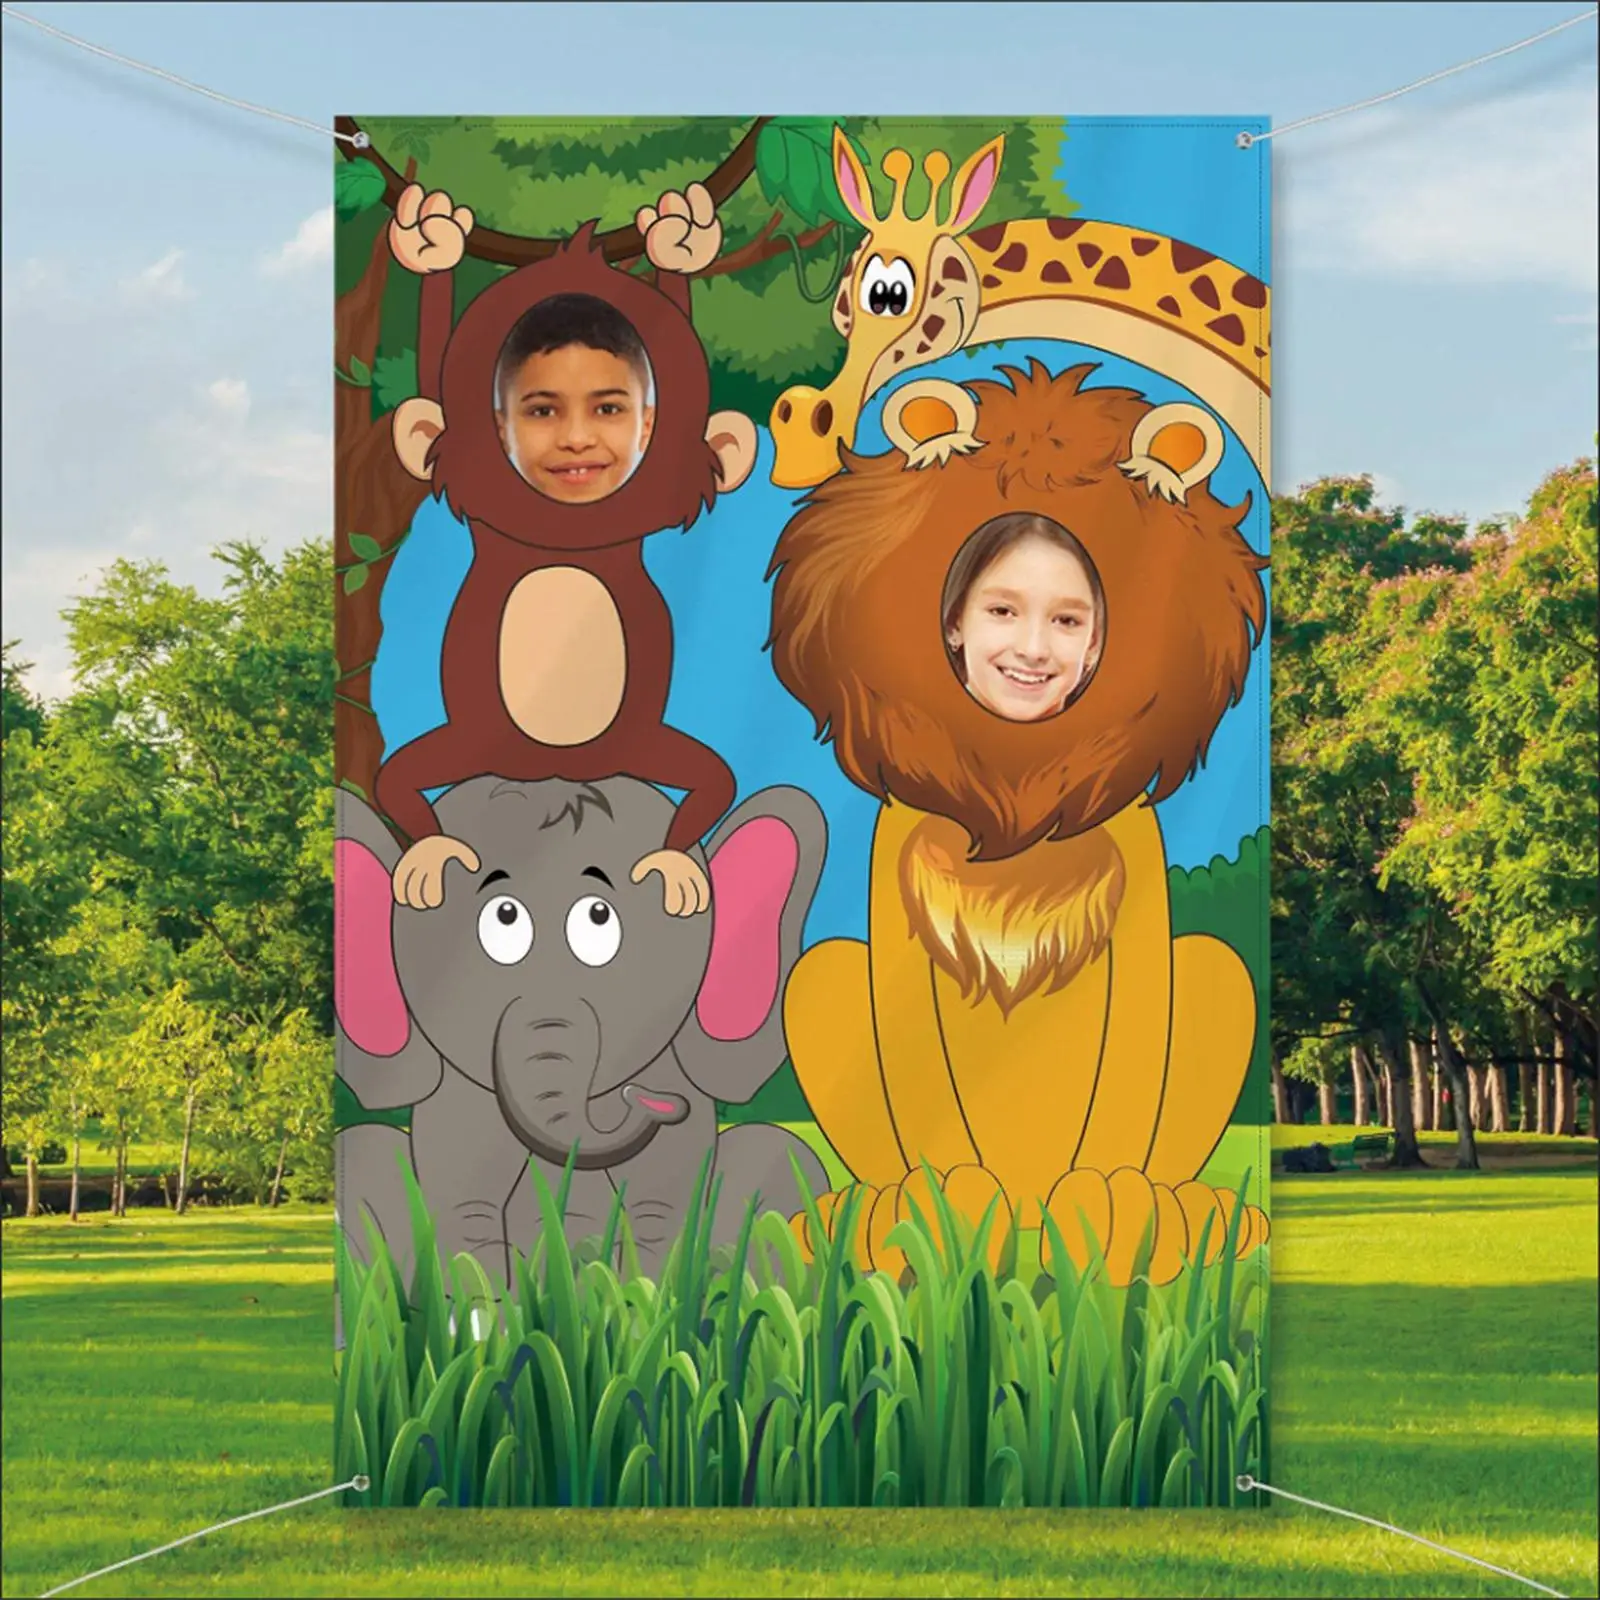 Jungle Animals Party Photo Prop Backdrop Bright Colors Printed with Lion Giraffe Elephant and Monkey with Zoo Animals Elements